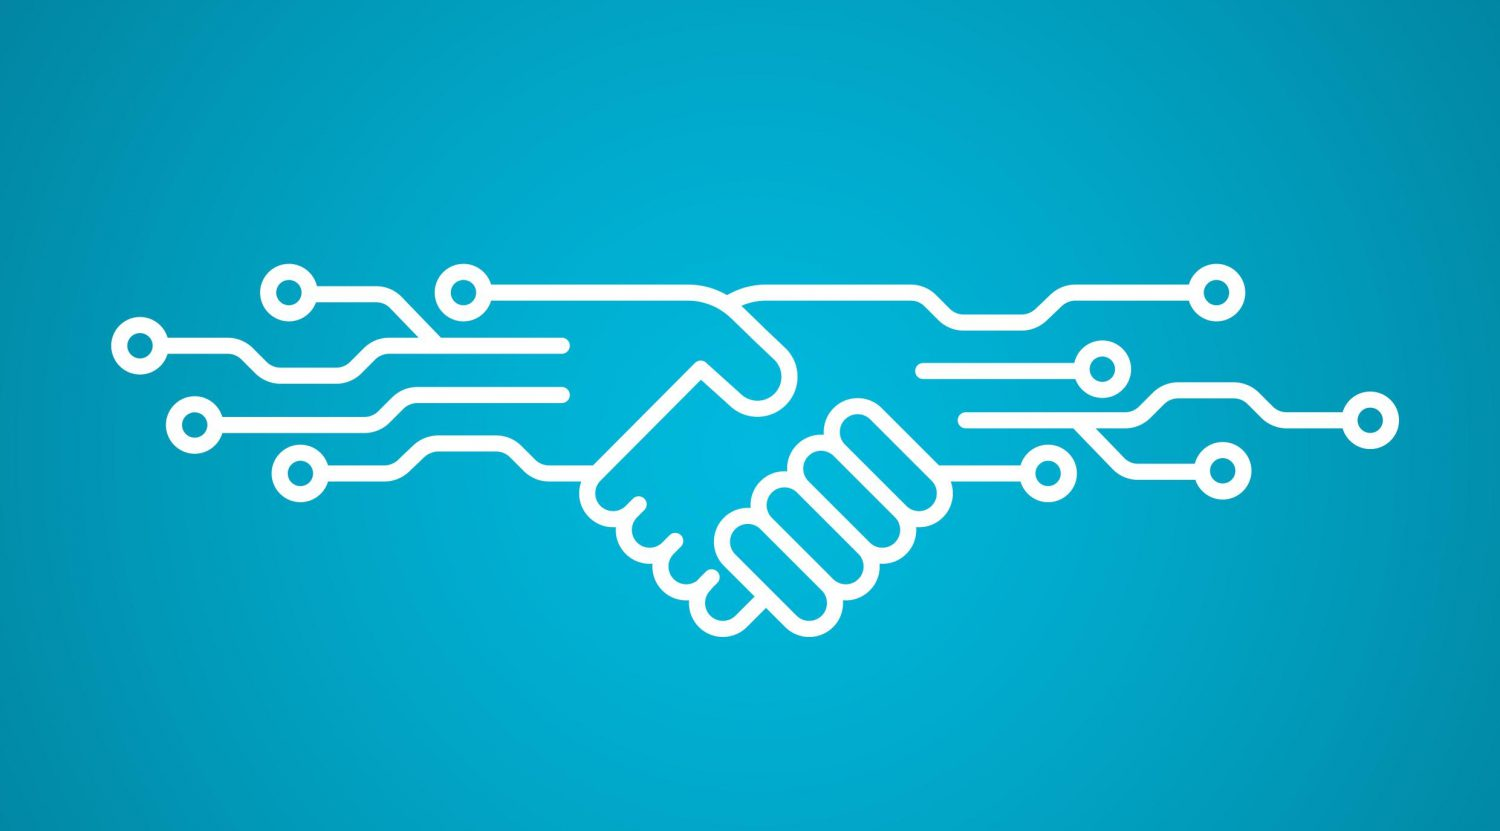 Importance and Opportunities of smart contracts